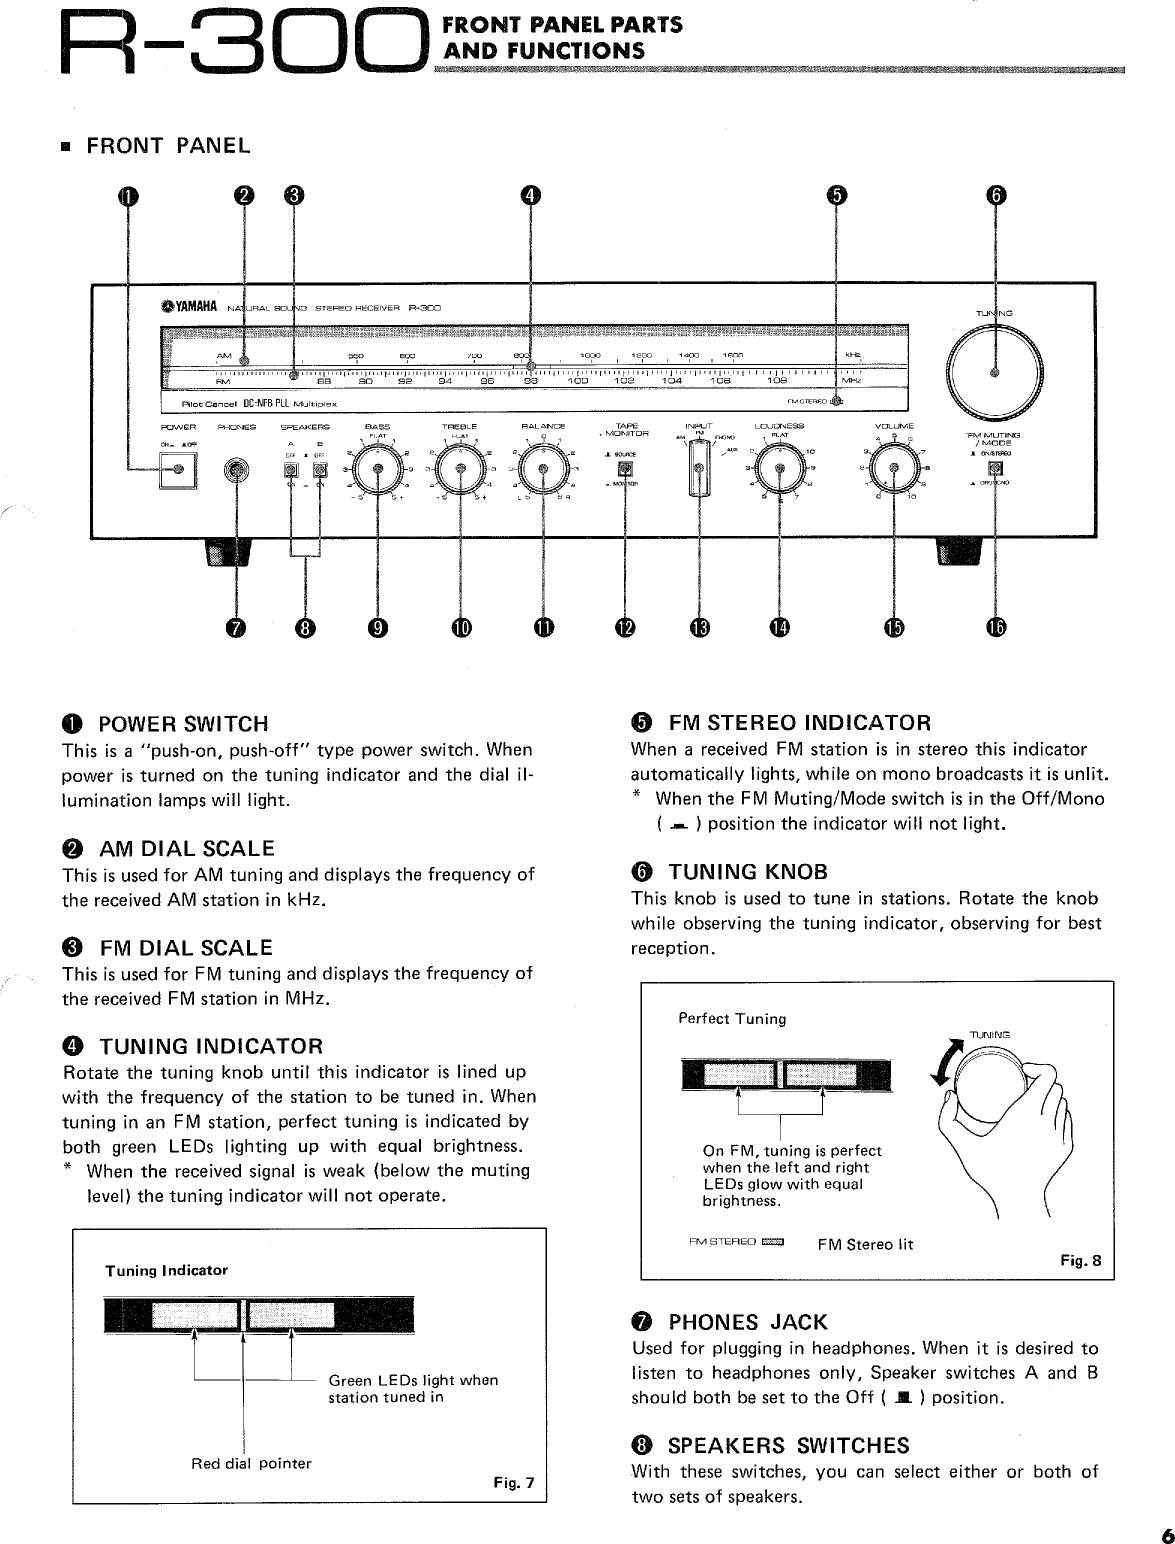 Page 7 of 12 - Yamaha .橡.ページ) R-300 OWNER'S MANUAL R300